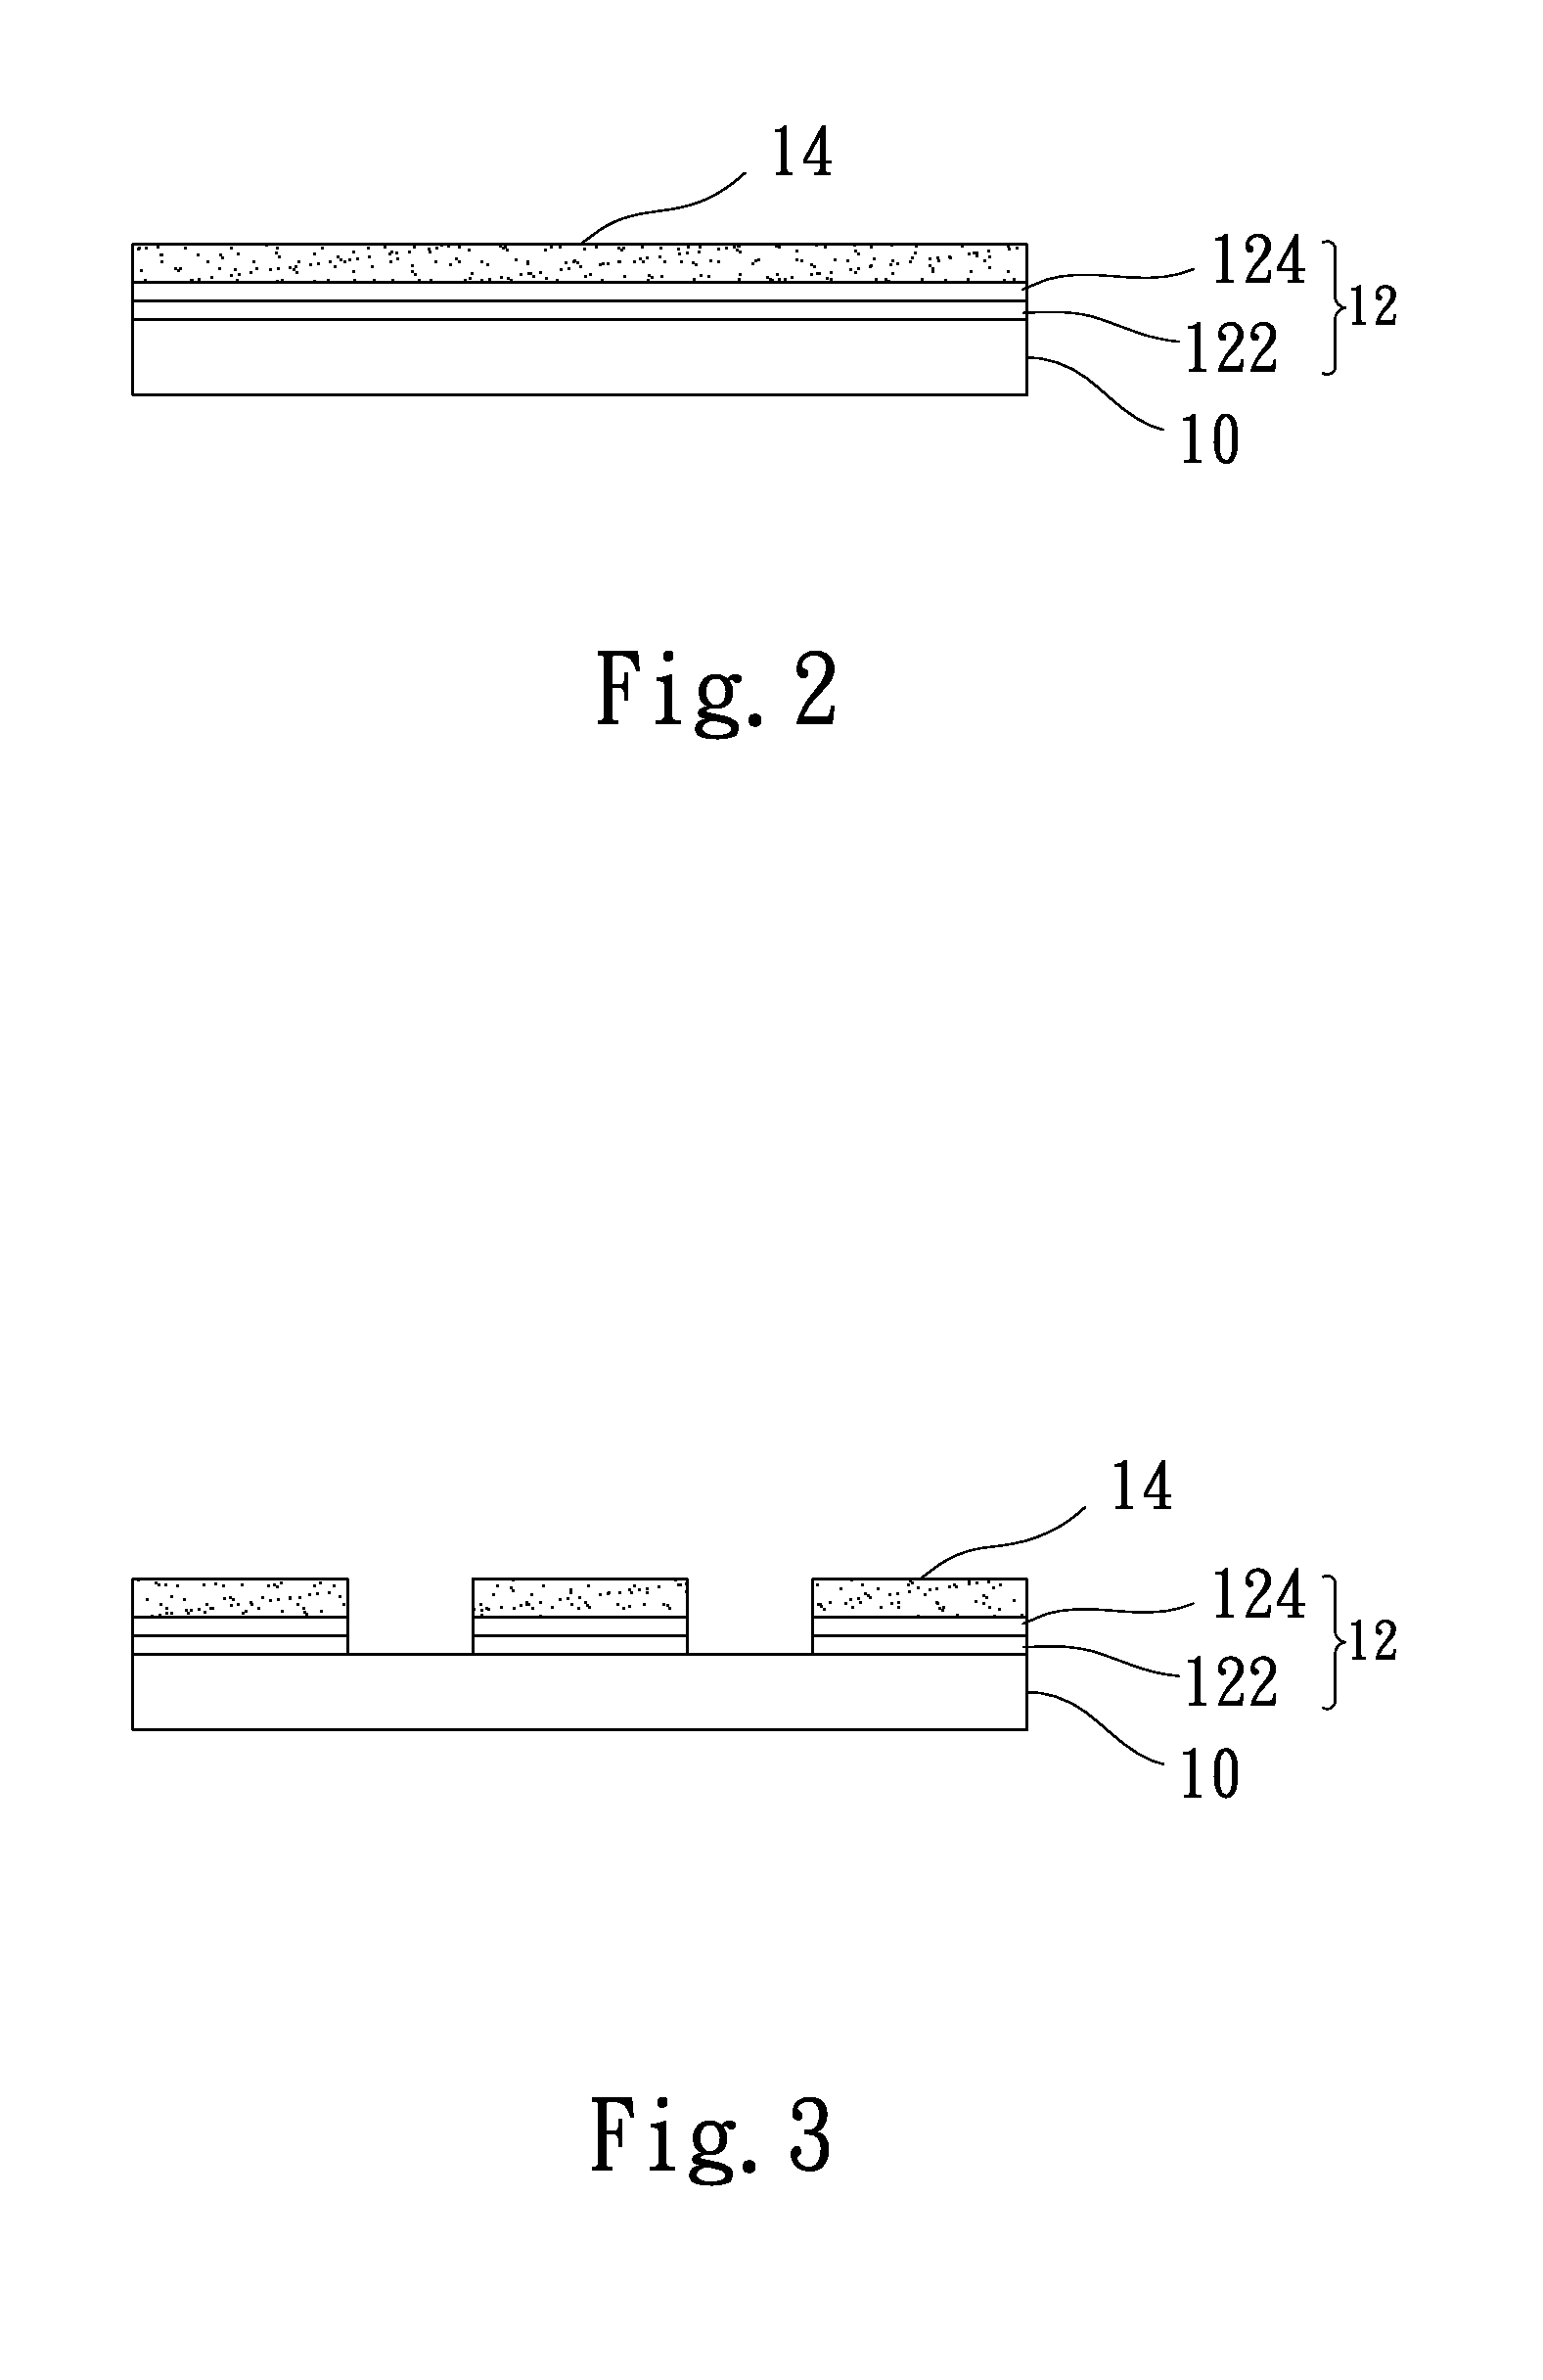 Method for fabricating one-dimensional metallic nanostructures